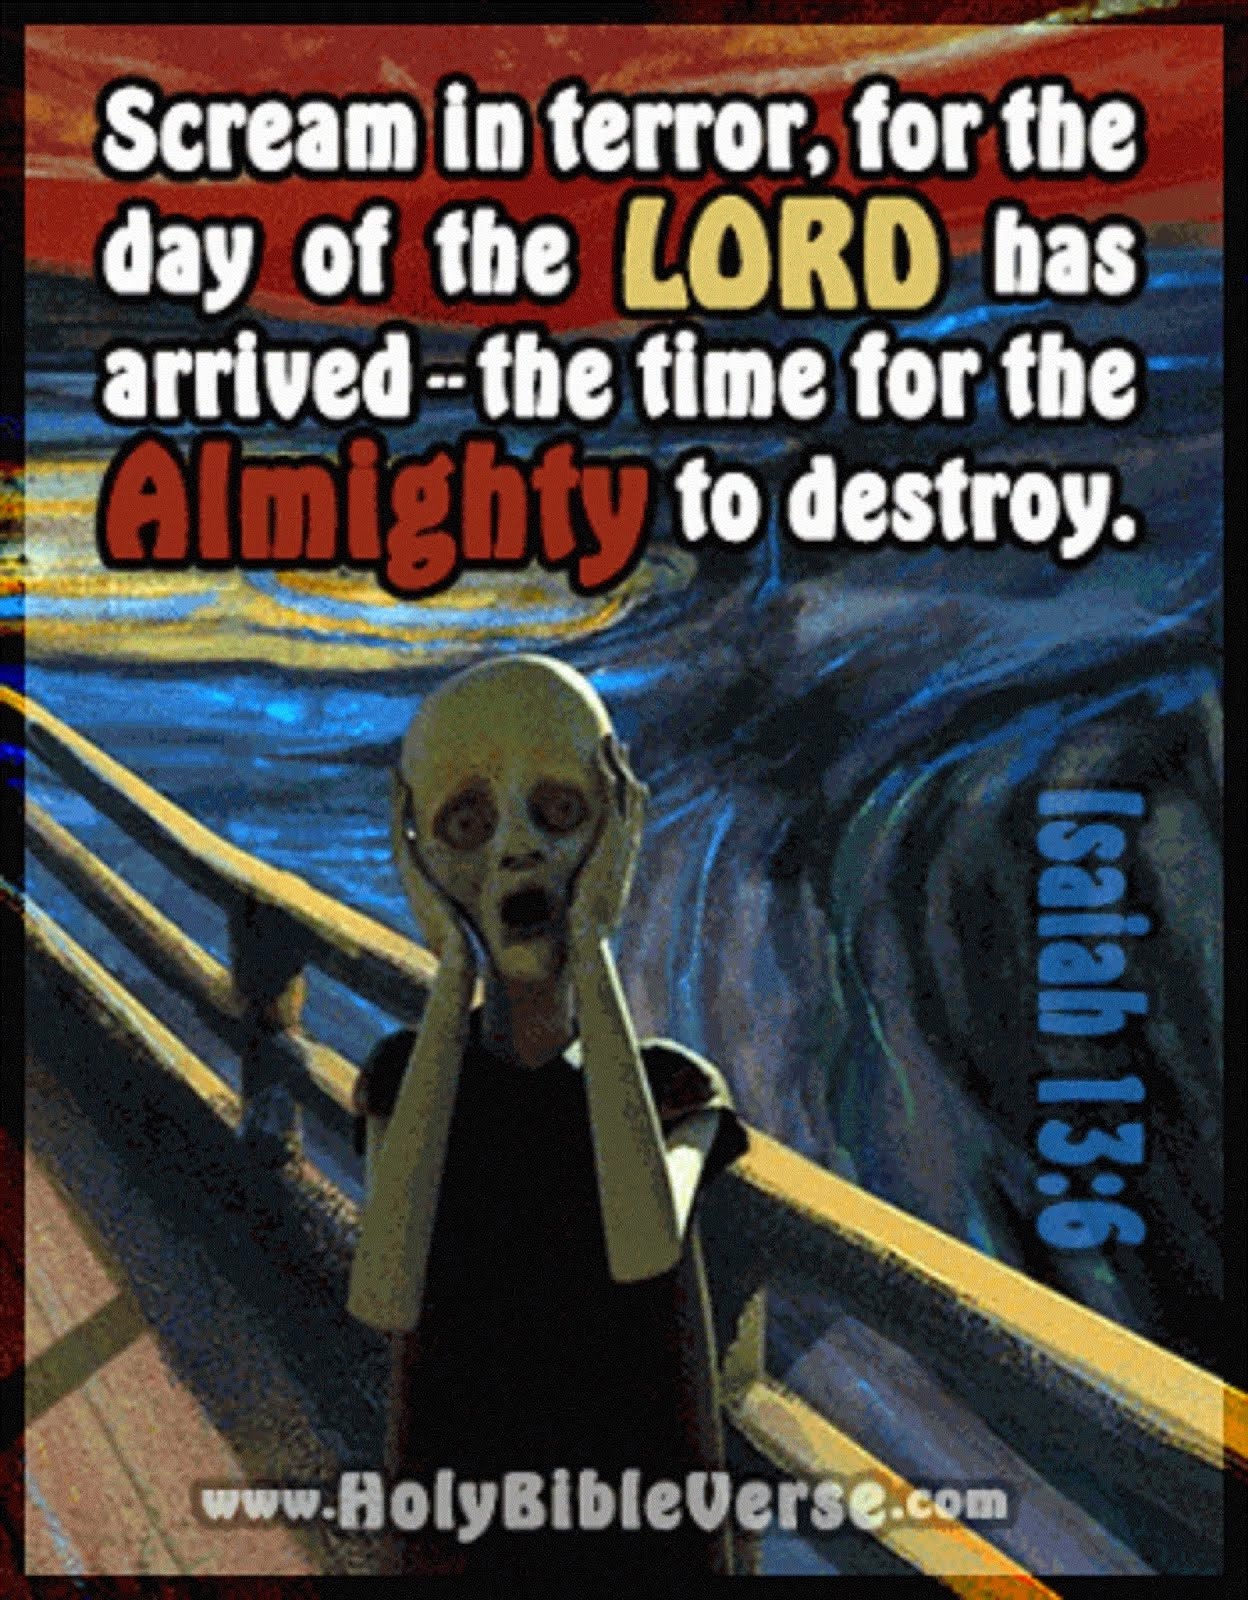 SCREAM IN TERROR FOR THE DAY OF THE LORD HAS ARRIVED